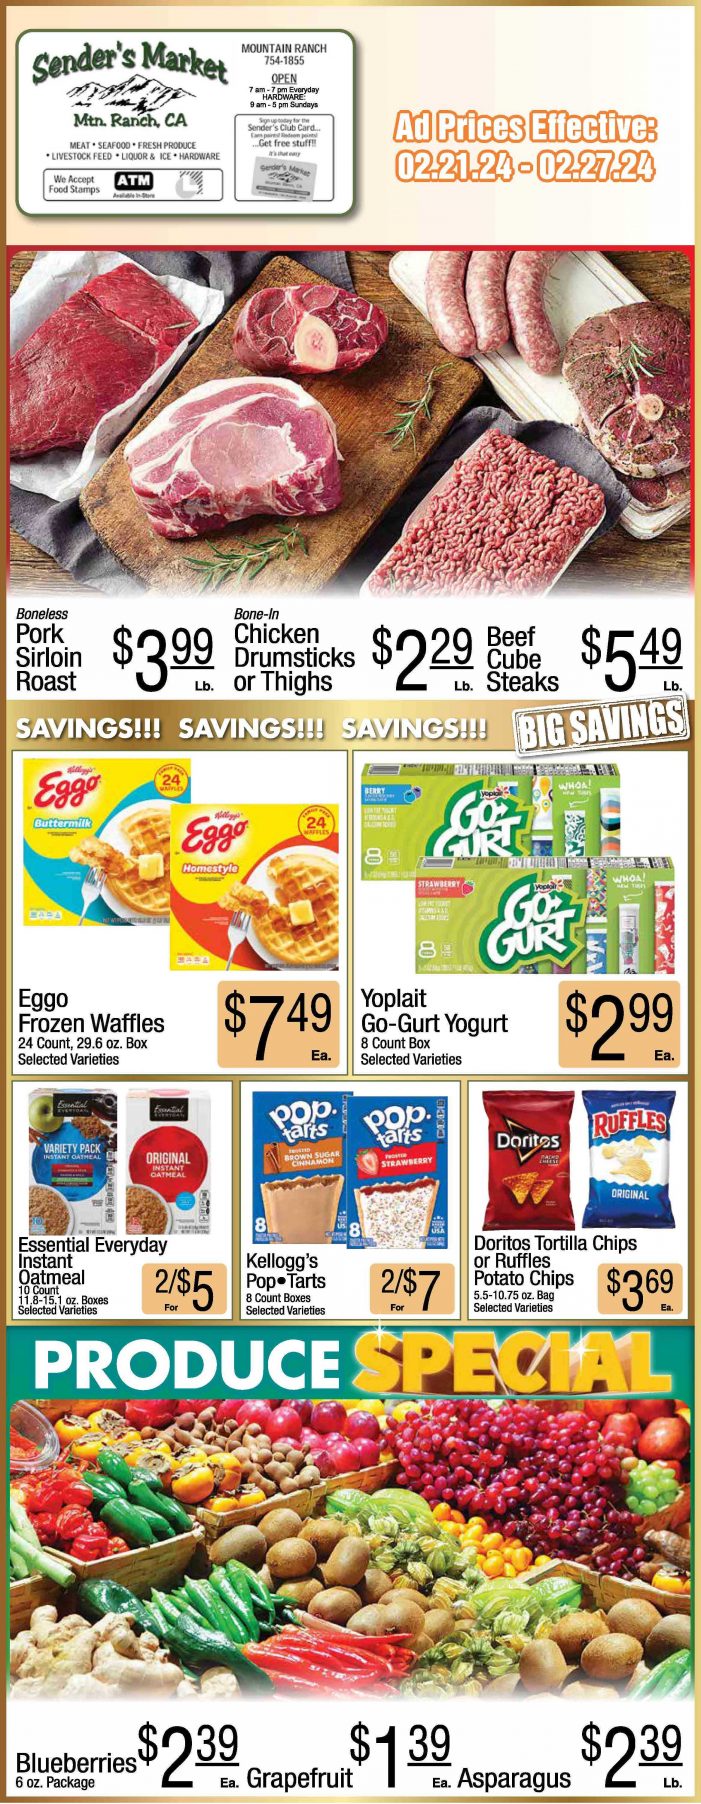 Sender’s Market Weekly Ad & Grocery Specials Through February 27th! Shop Local & Save!!